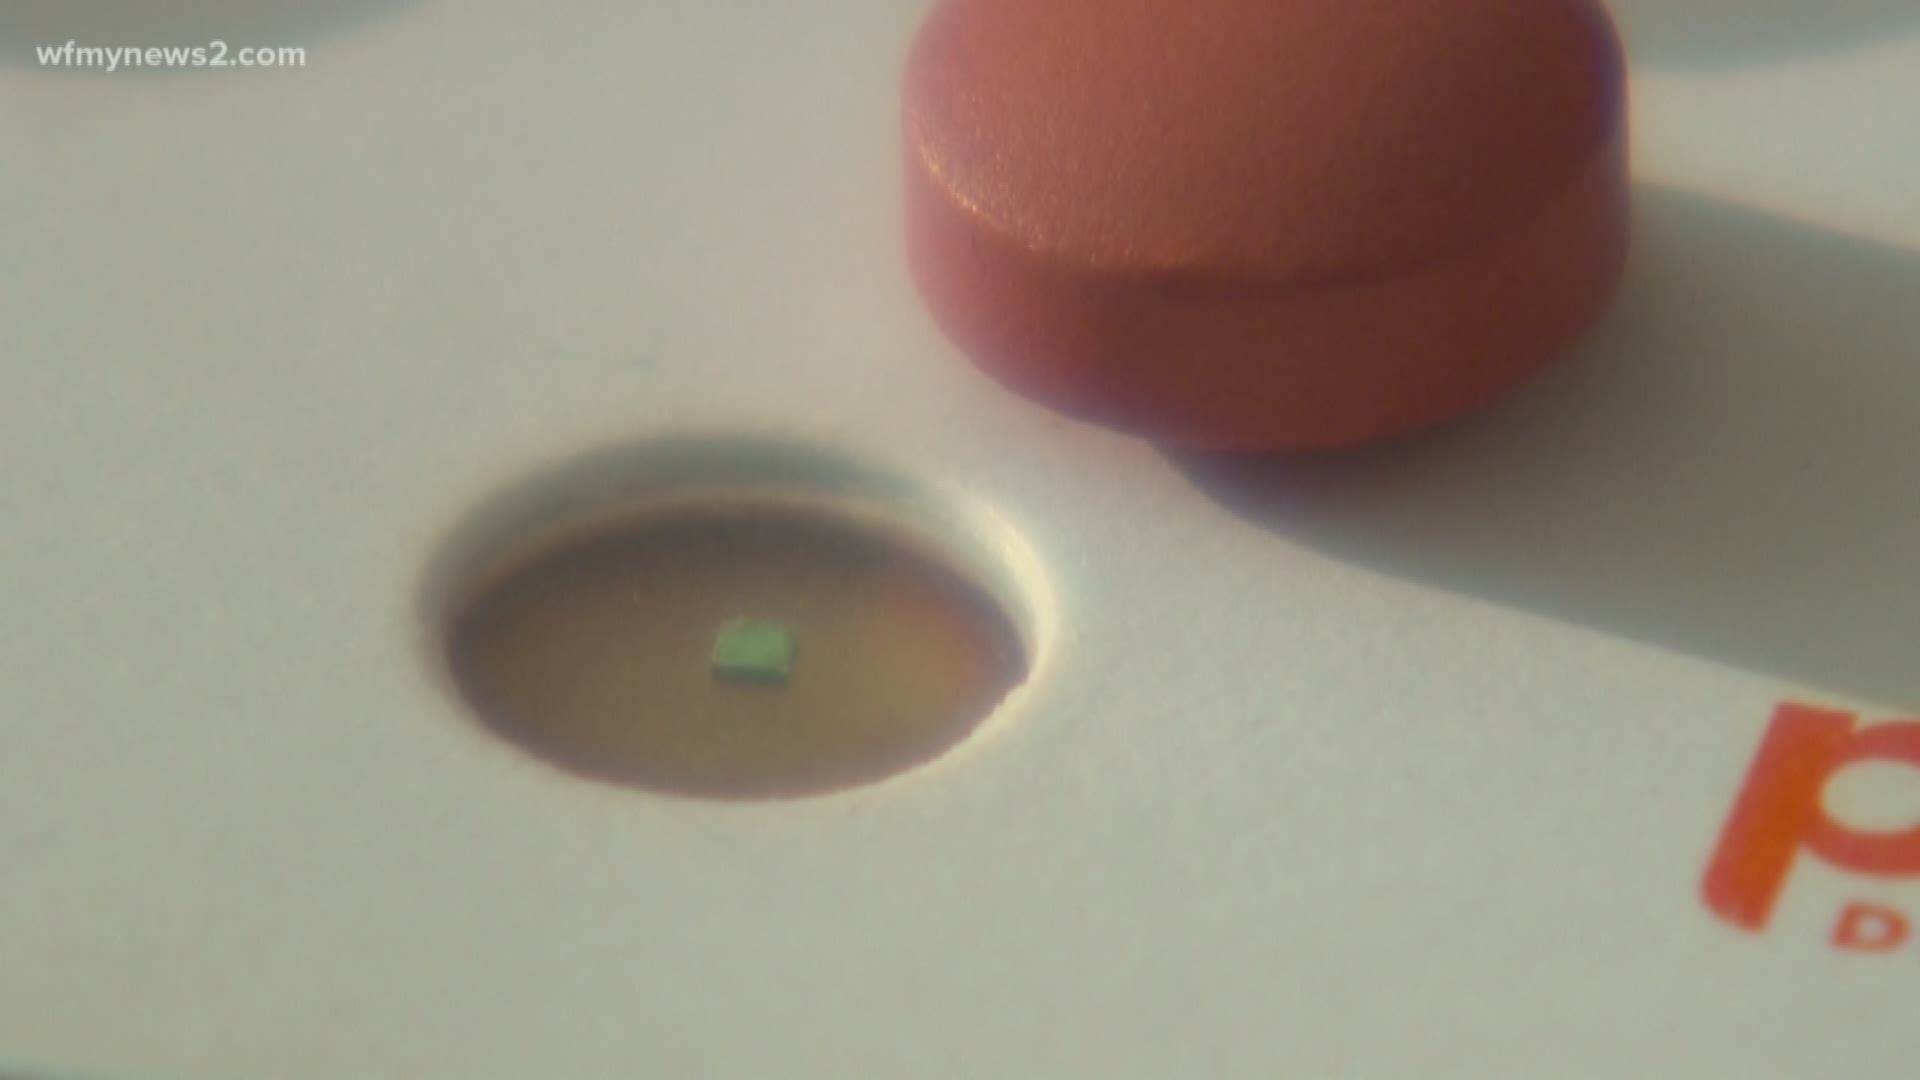 A pill with a chip inside it can notify someone when you take it.